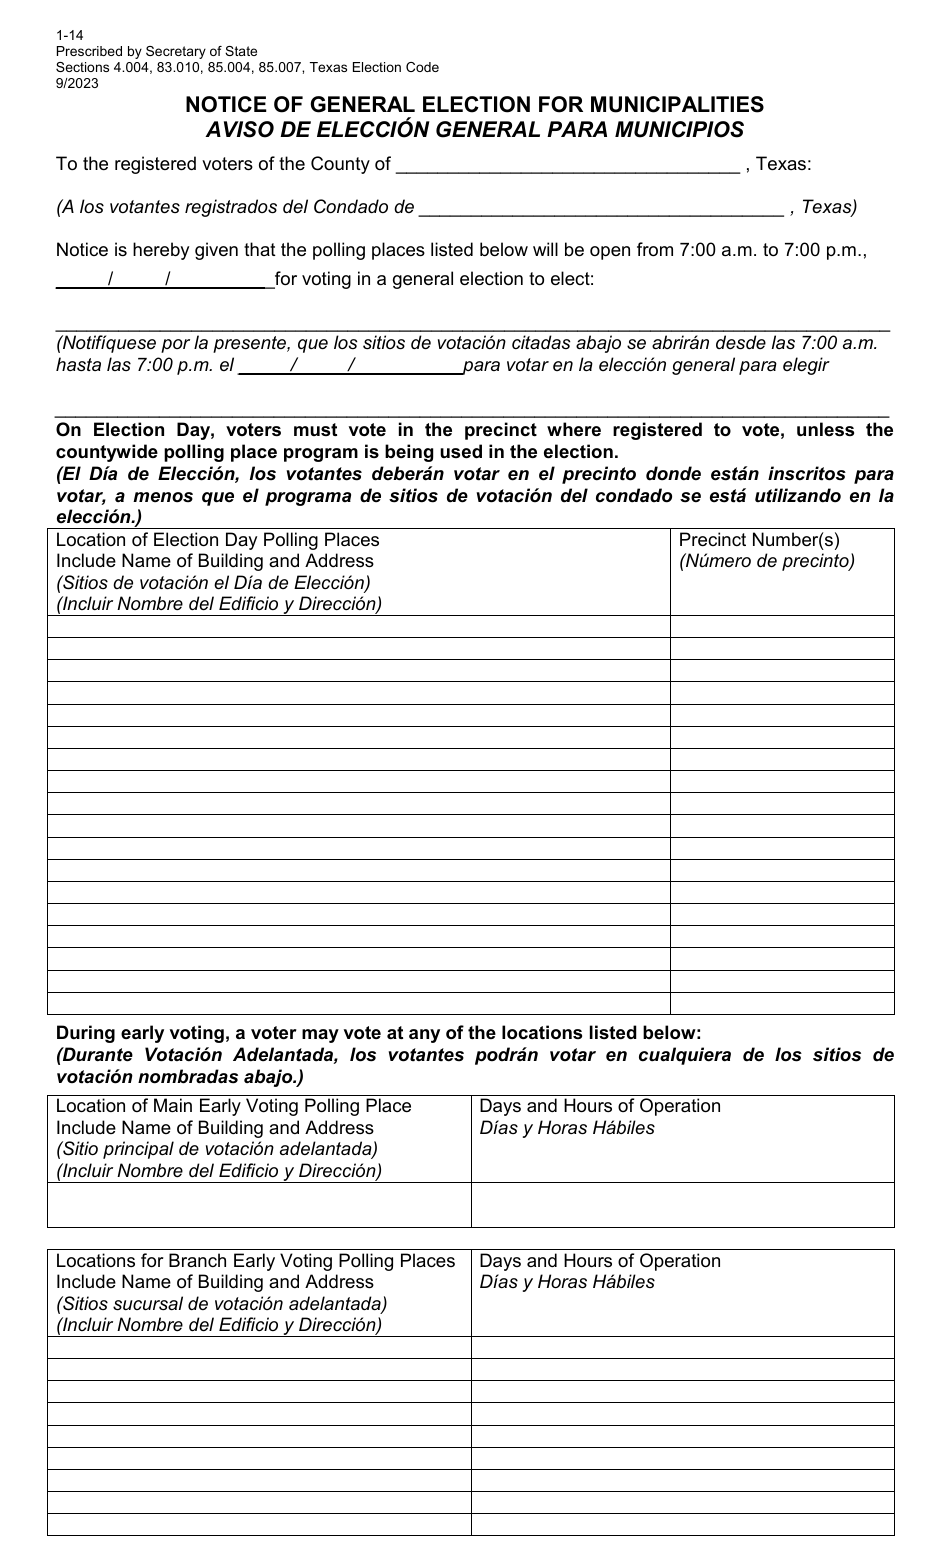 Form 1-14 Notice of General Election for Municipalities - Texas (English / Spanish), Page 1